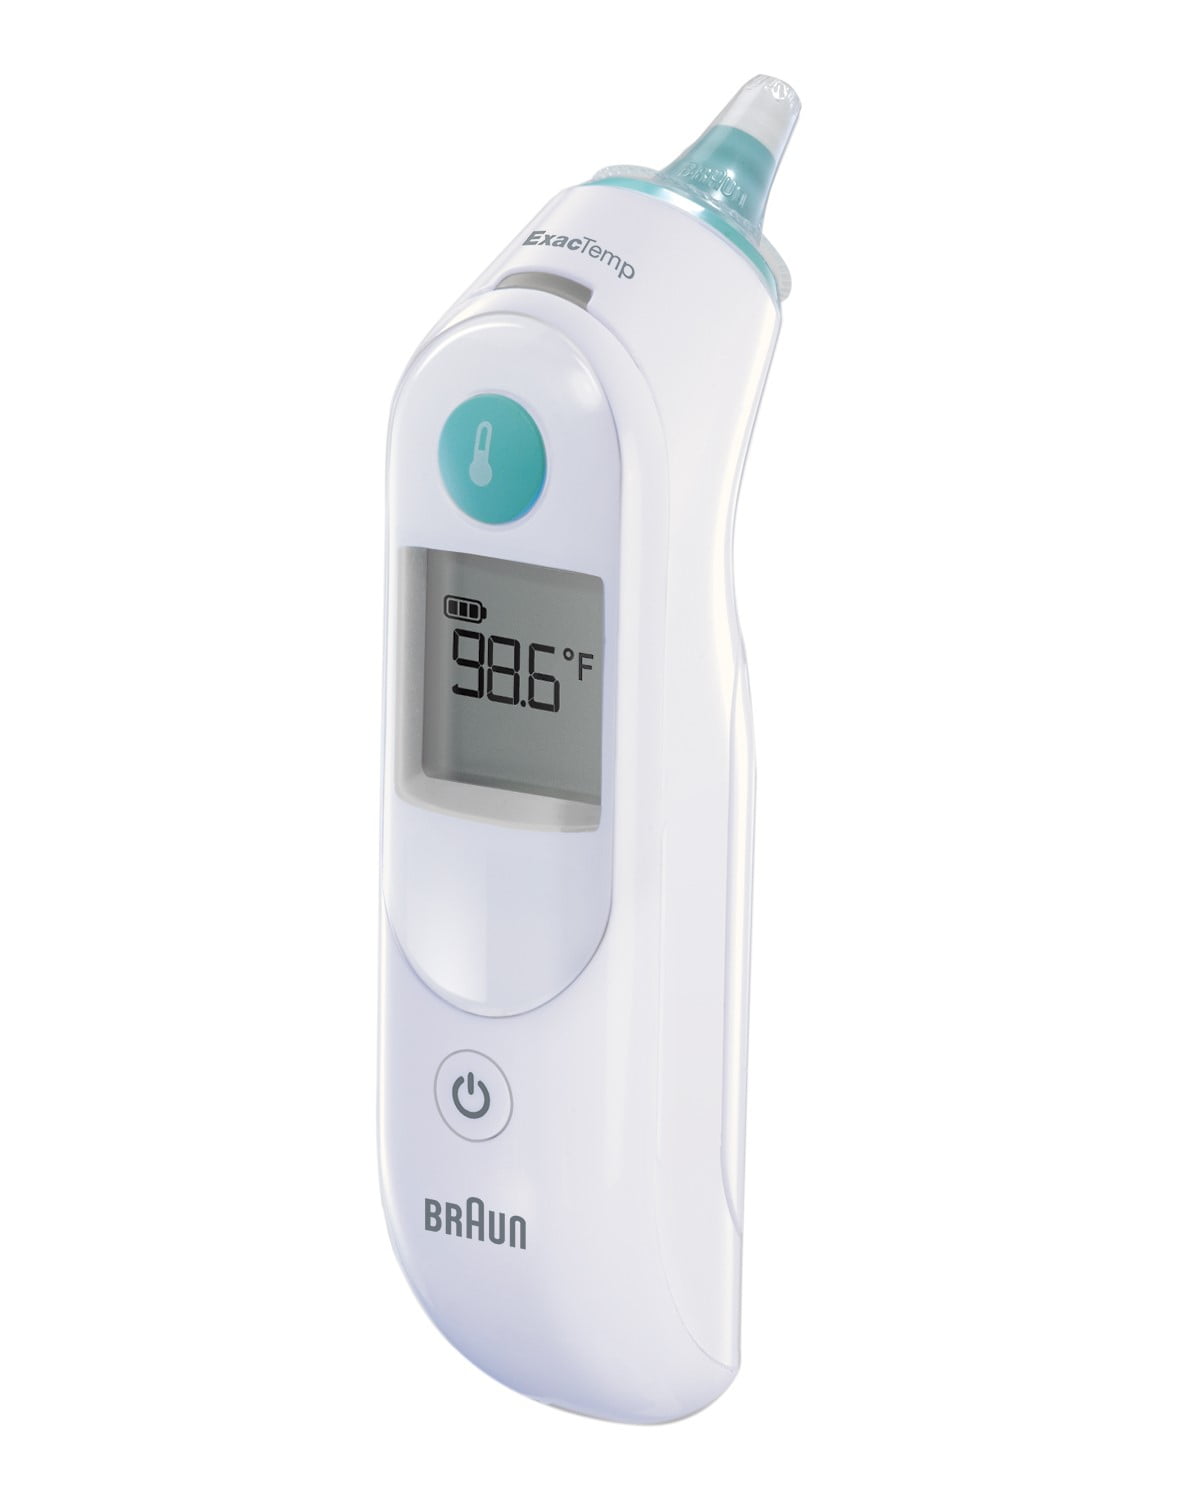 NEW Braun ThermoScan 5 IRT6020 Baby Digital Ear Thermometer with 80 Probe Covers 